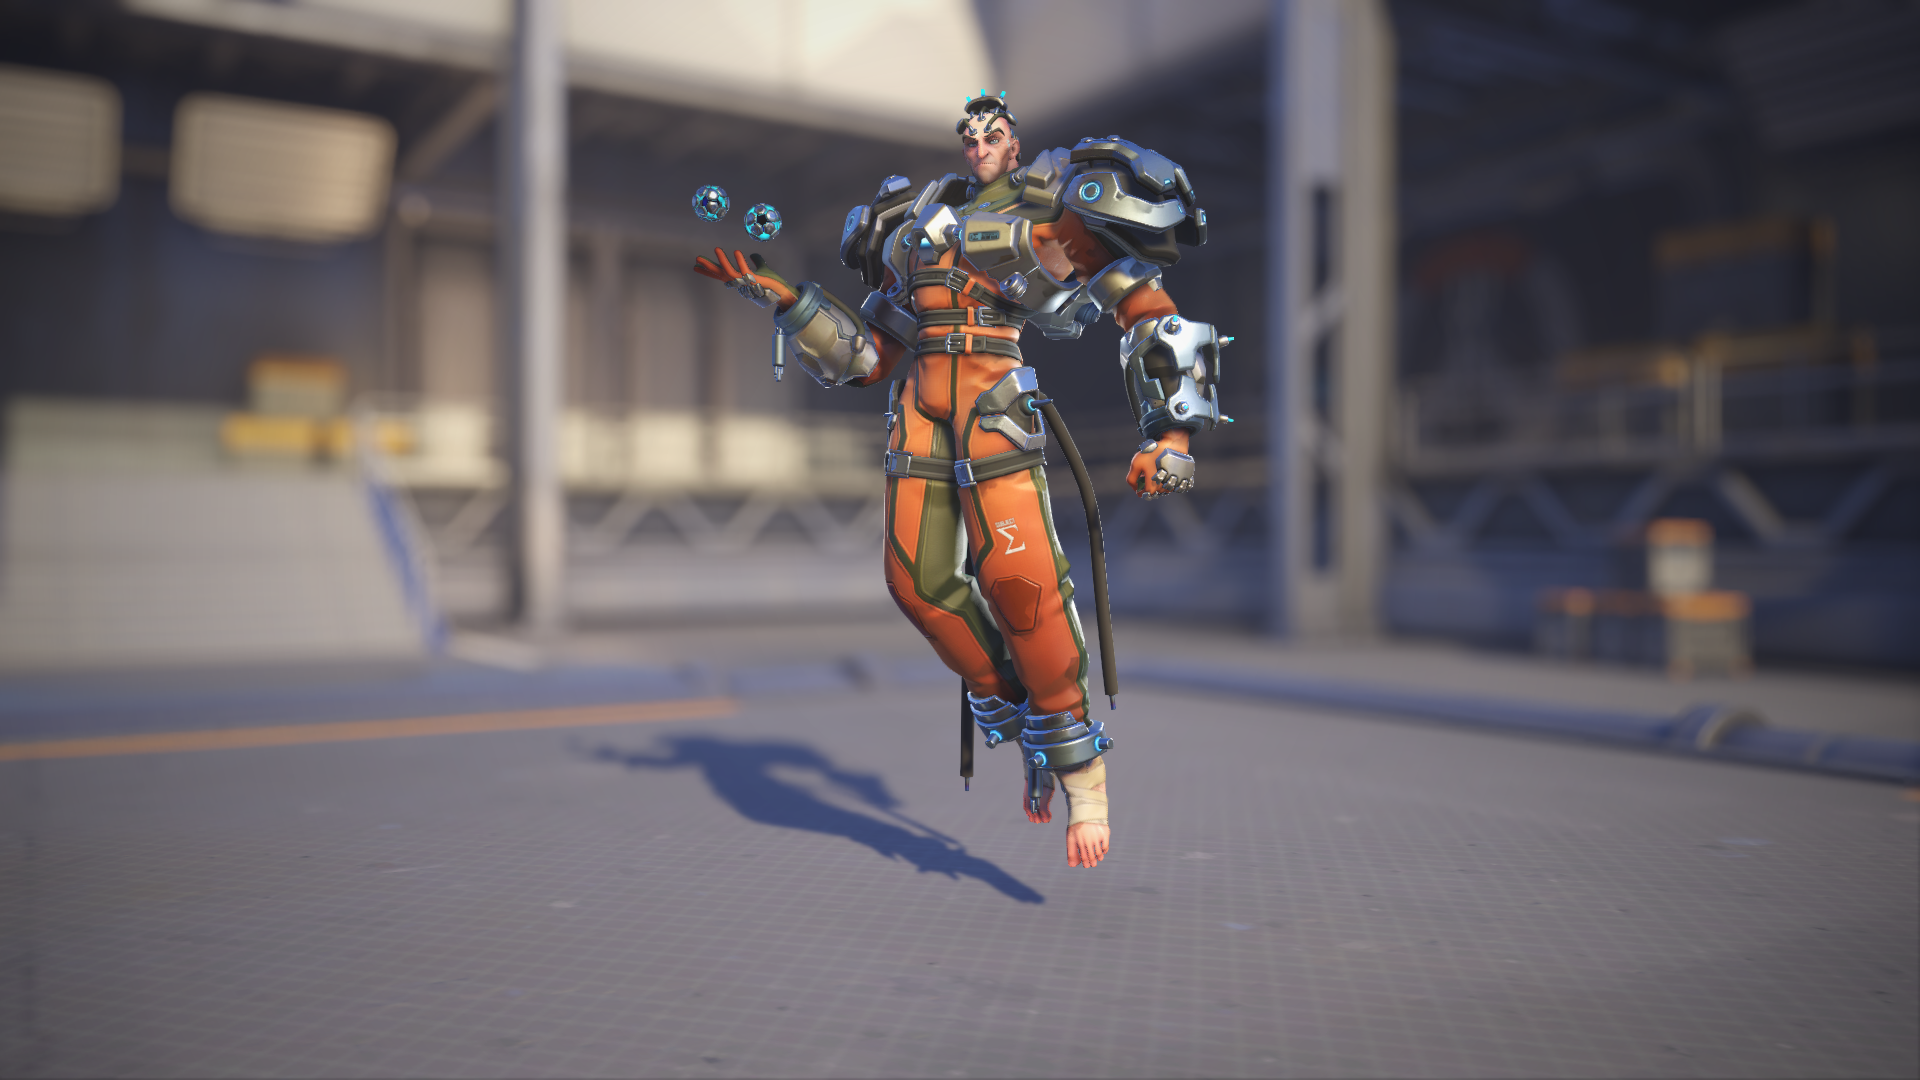 Sigma models his Subject Sigma skin in Overwatch 2.